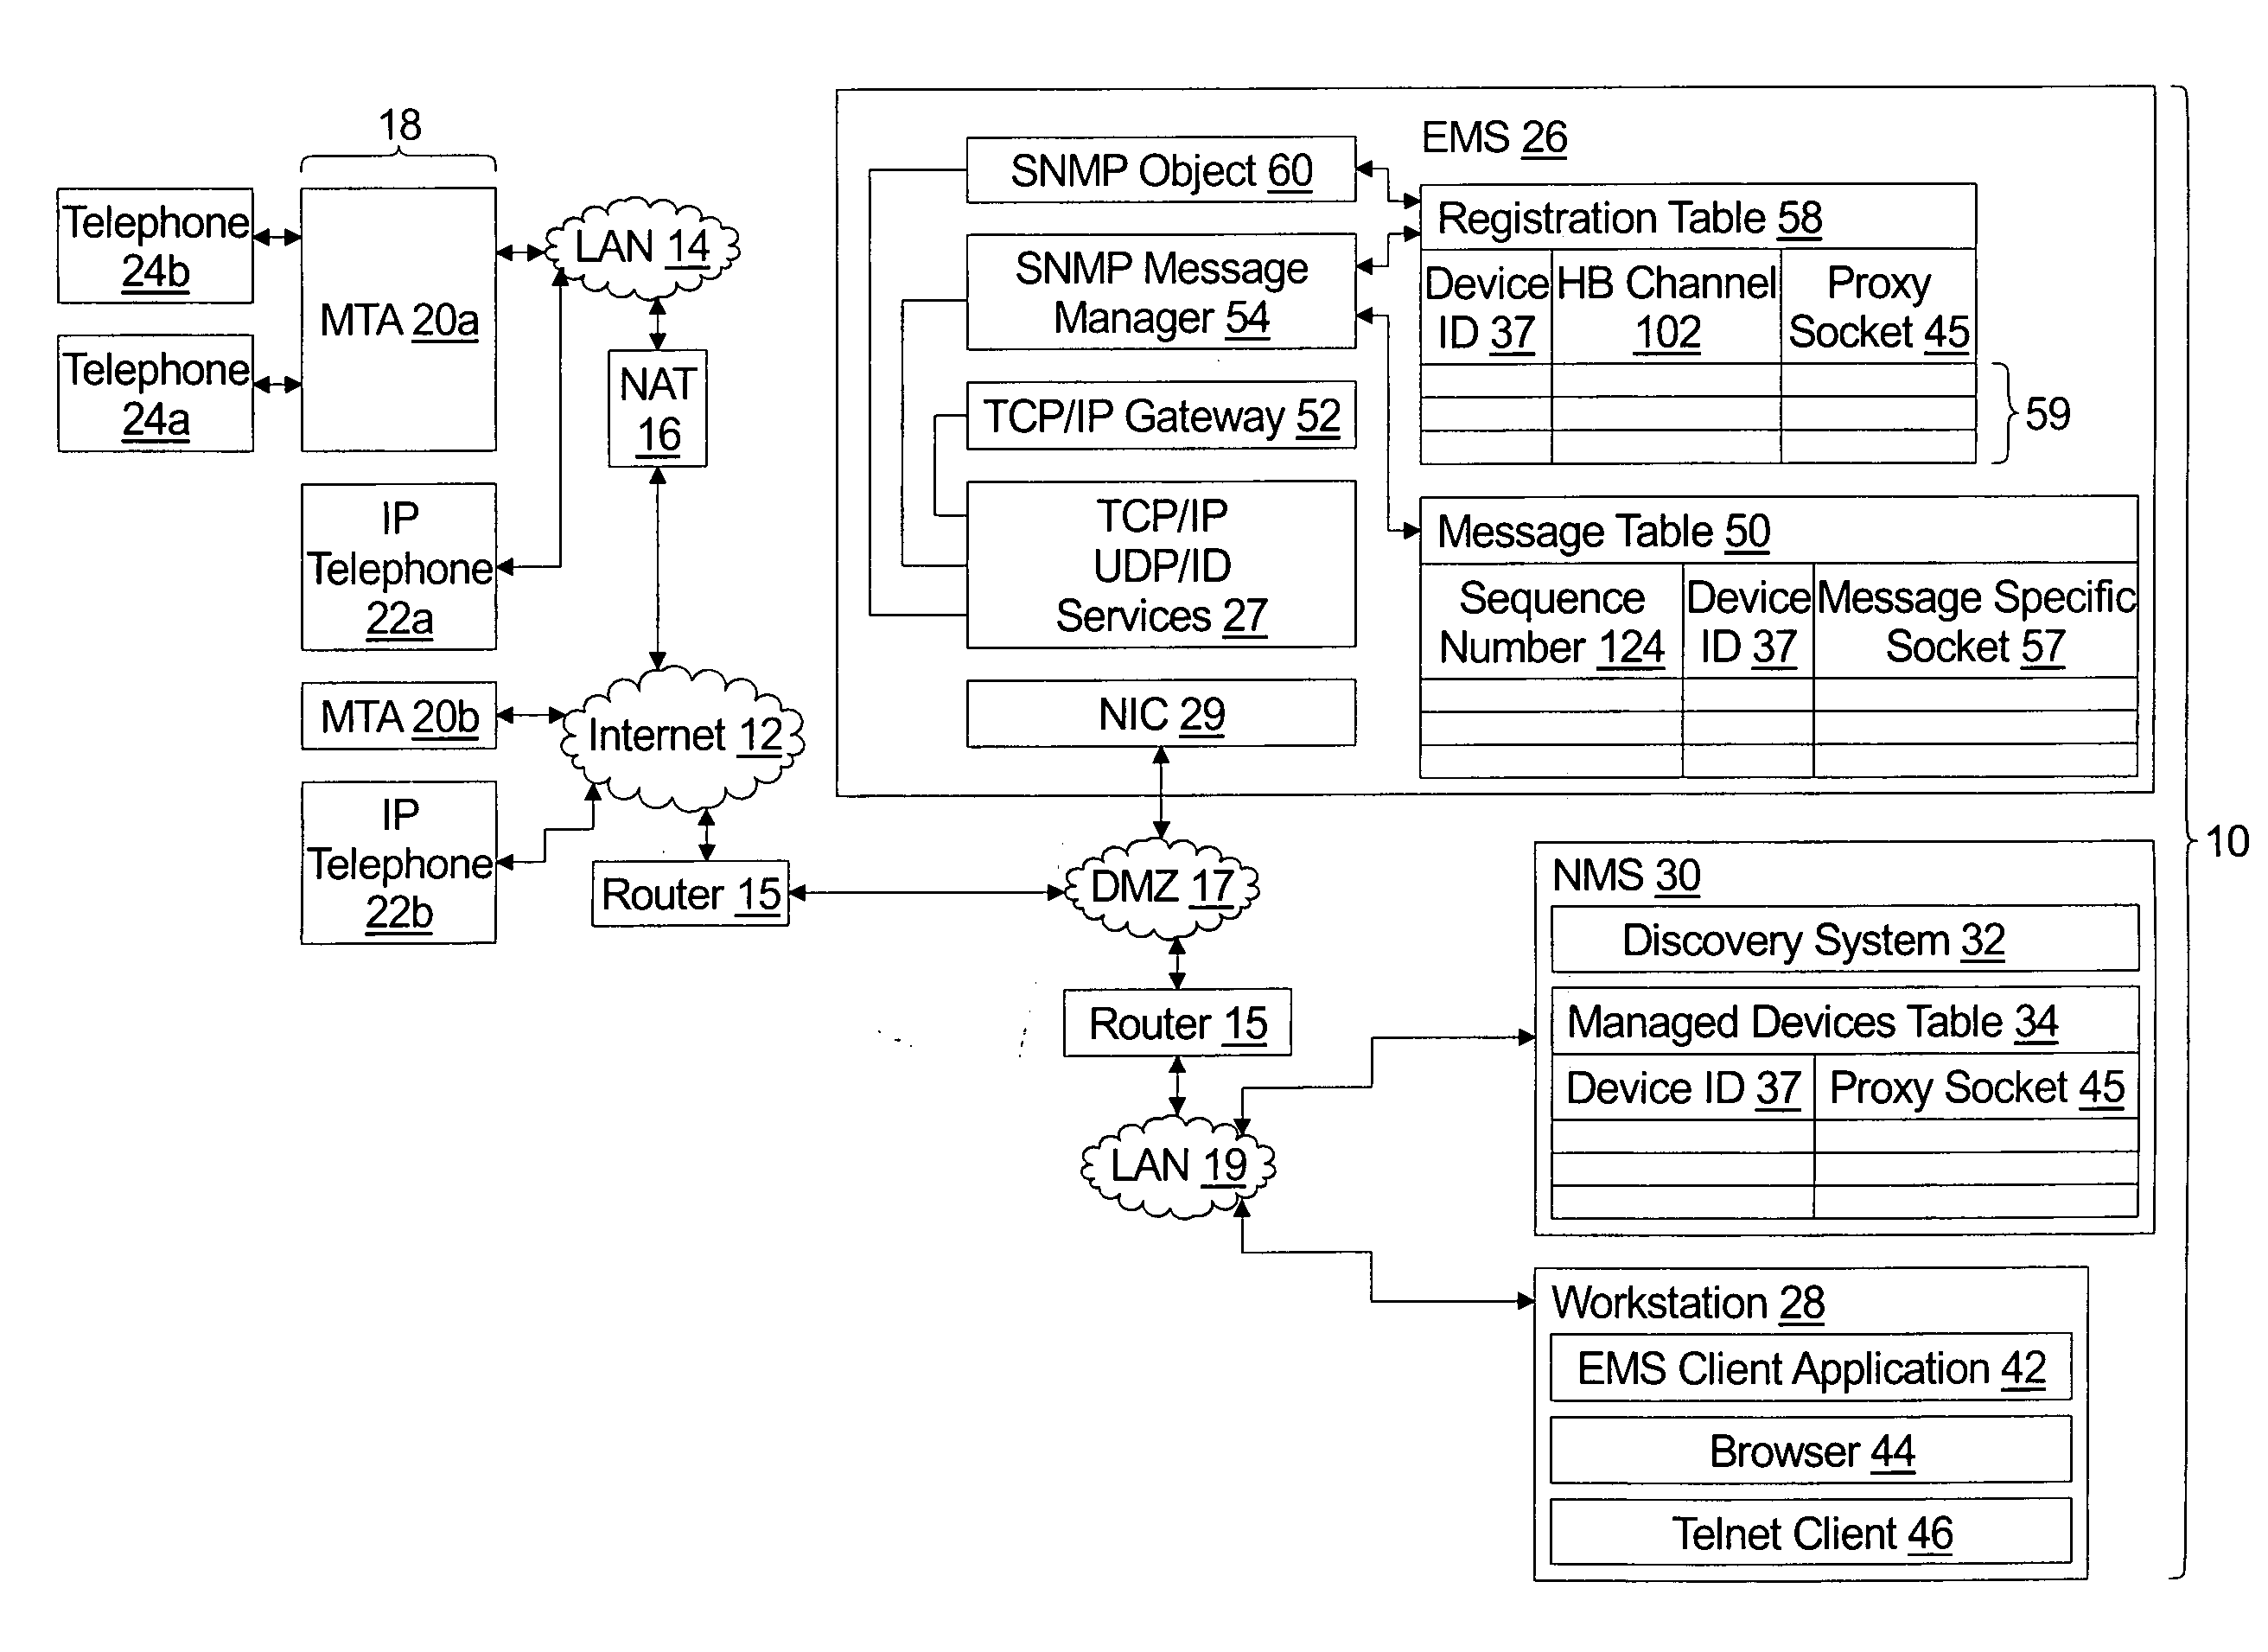 System for management of equipment deployed behind firewalls